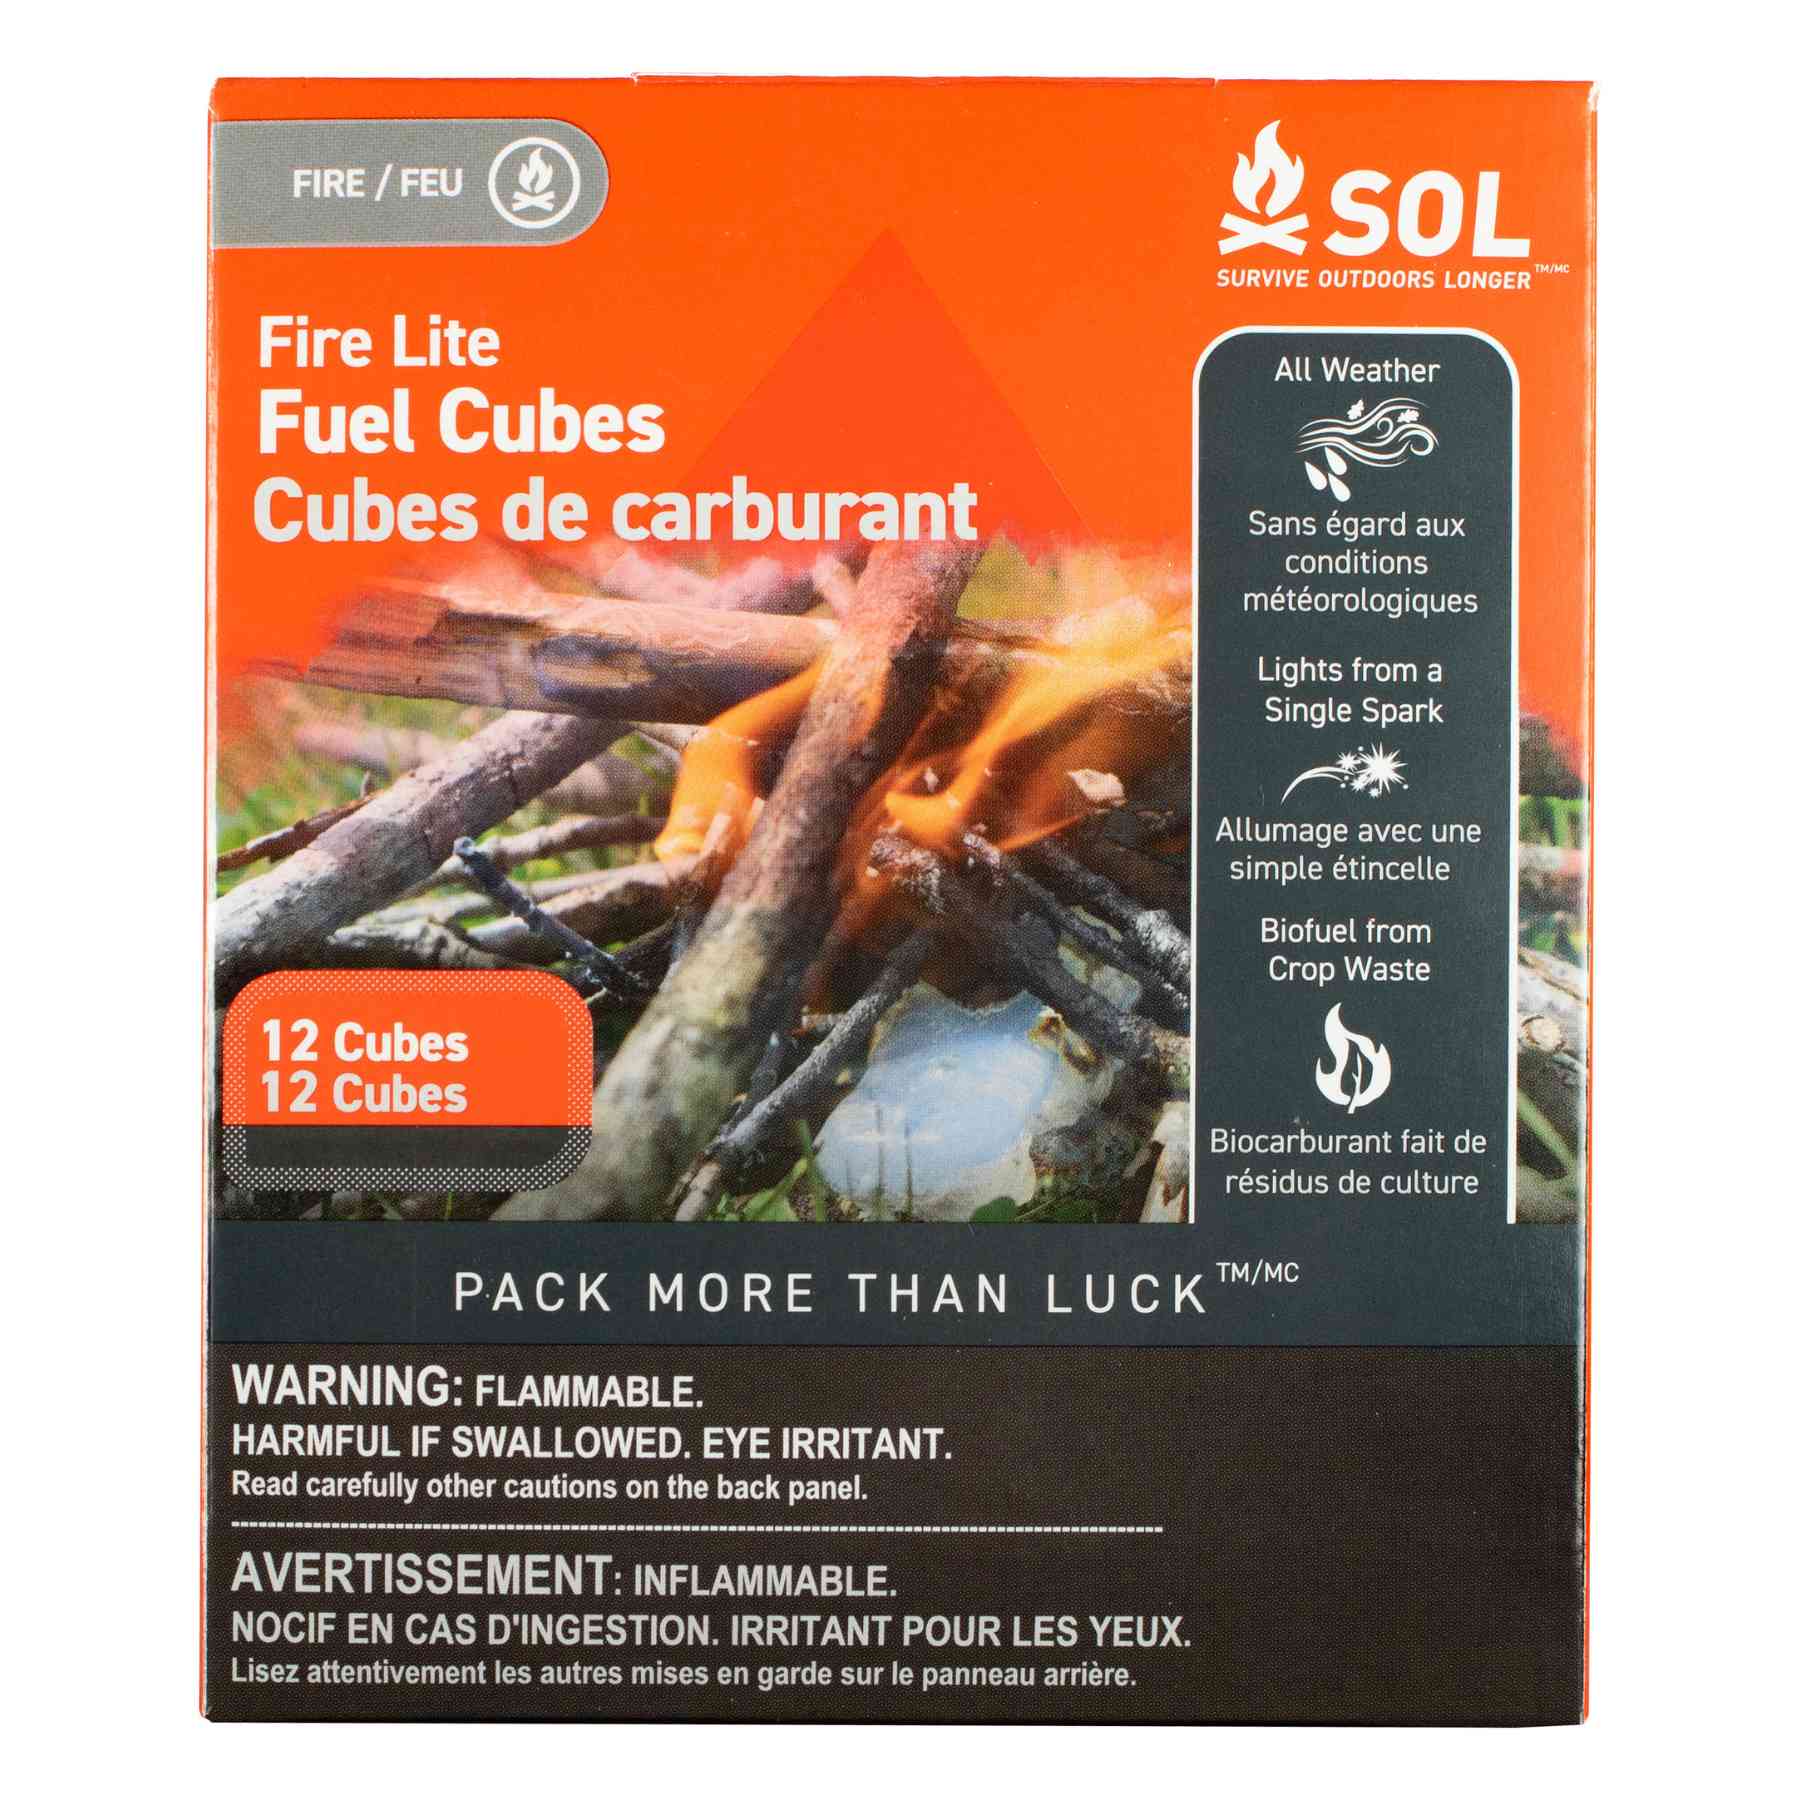 Fire Lite Fuel Cubes in packaging